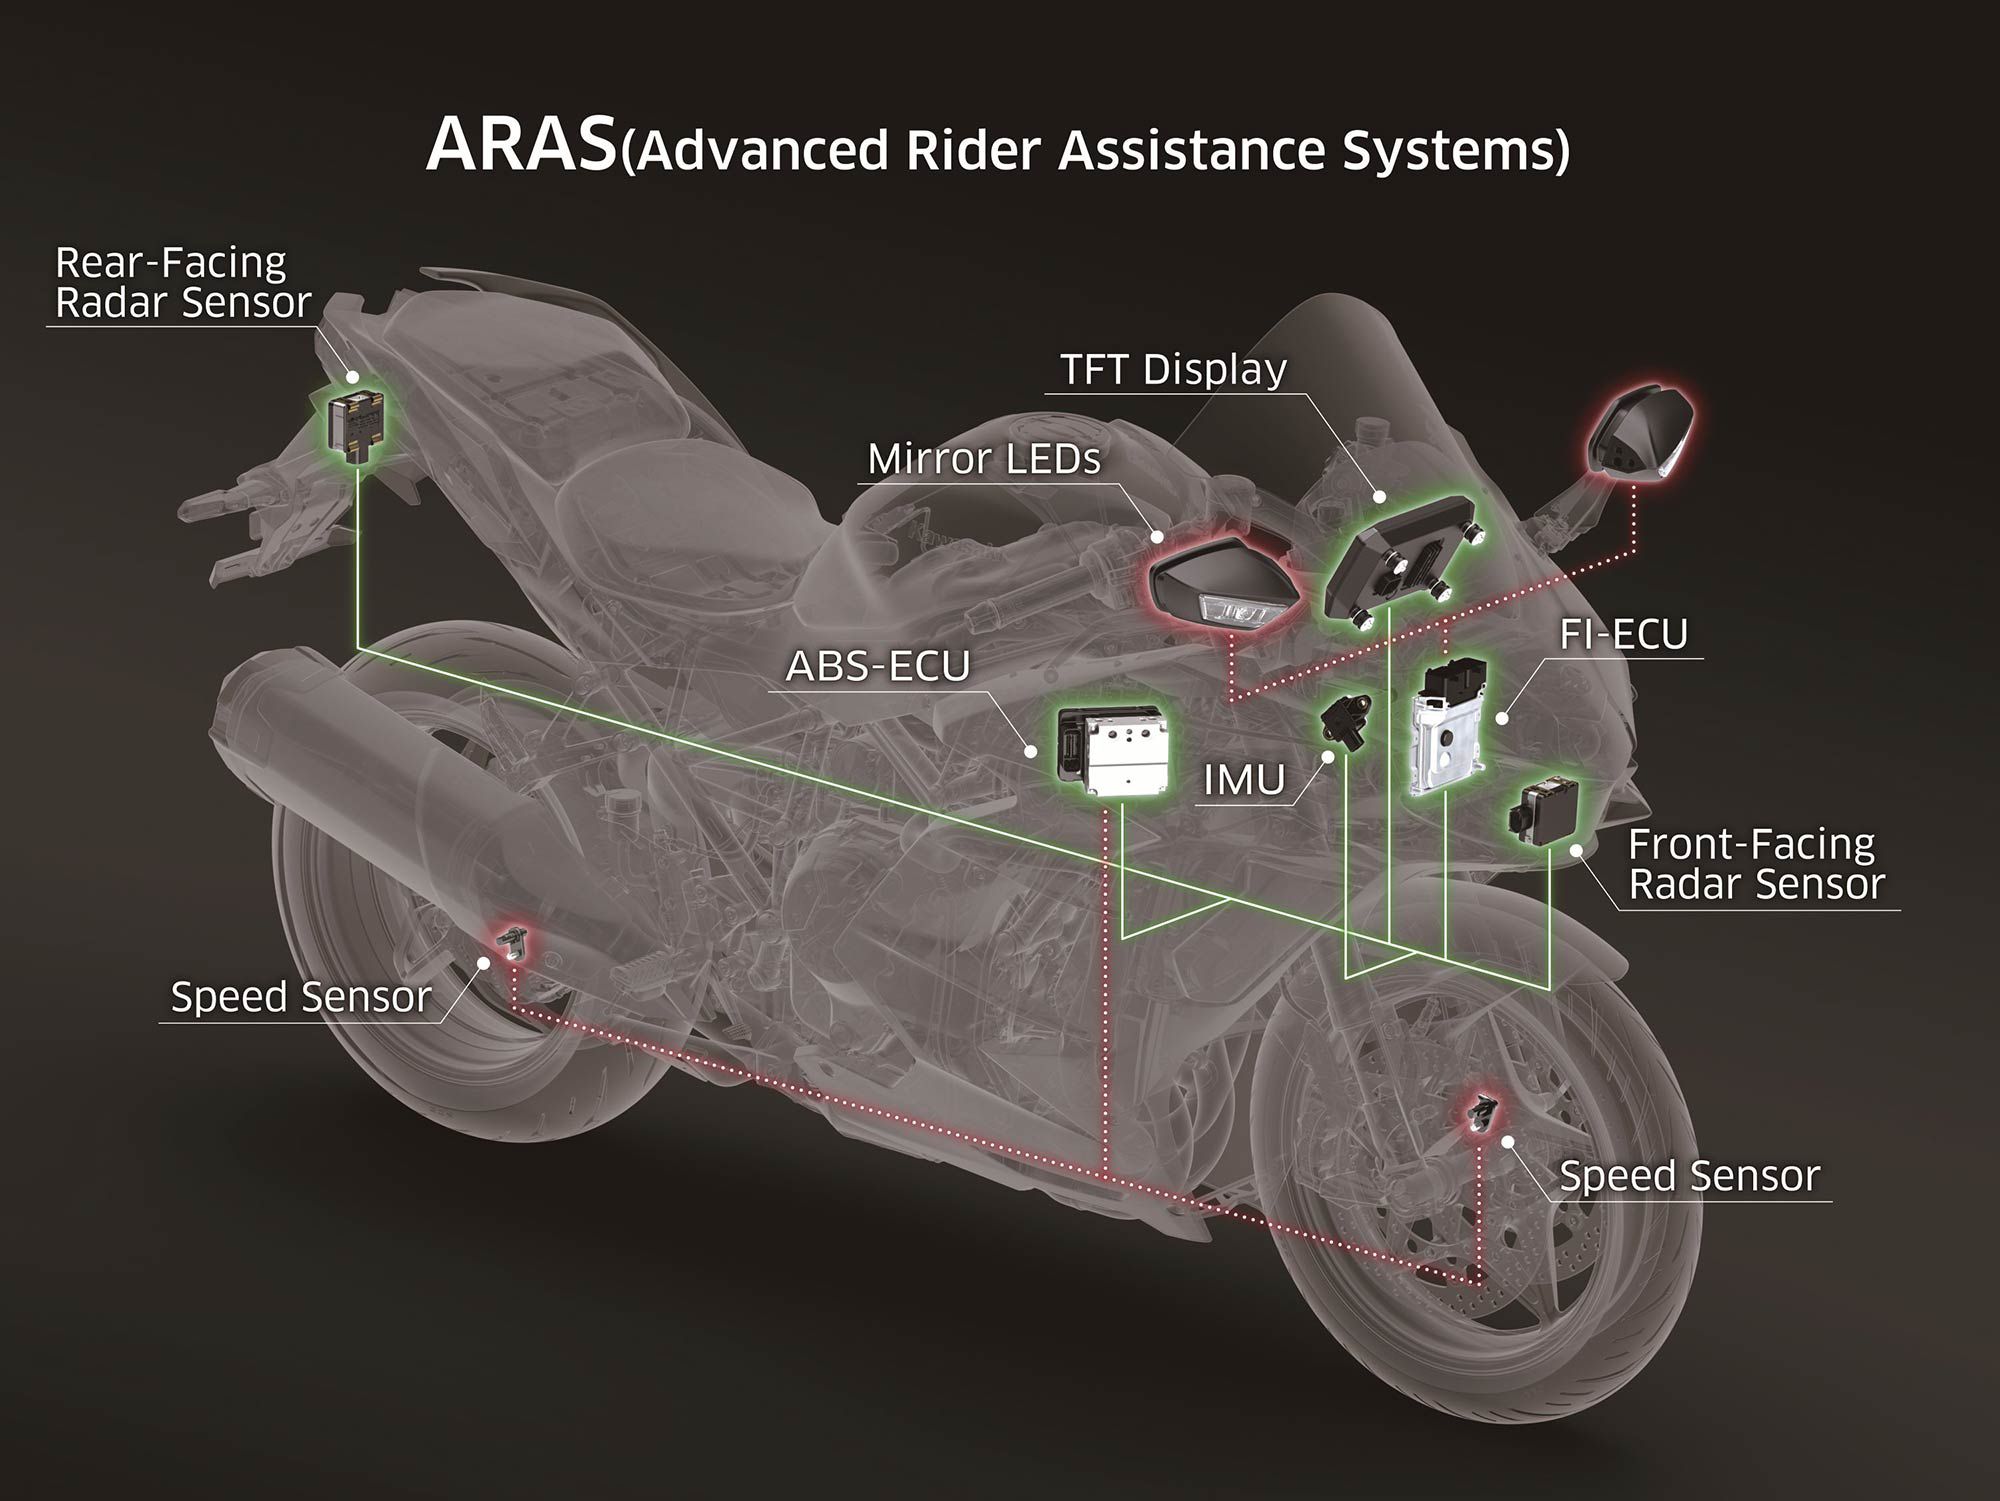 A new assortment of Bosch advanced rider Assistance systems help make the 2022 Kawasaki Ninja H2 SX SE safer, particularly in urban environments.